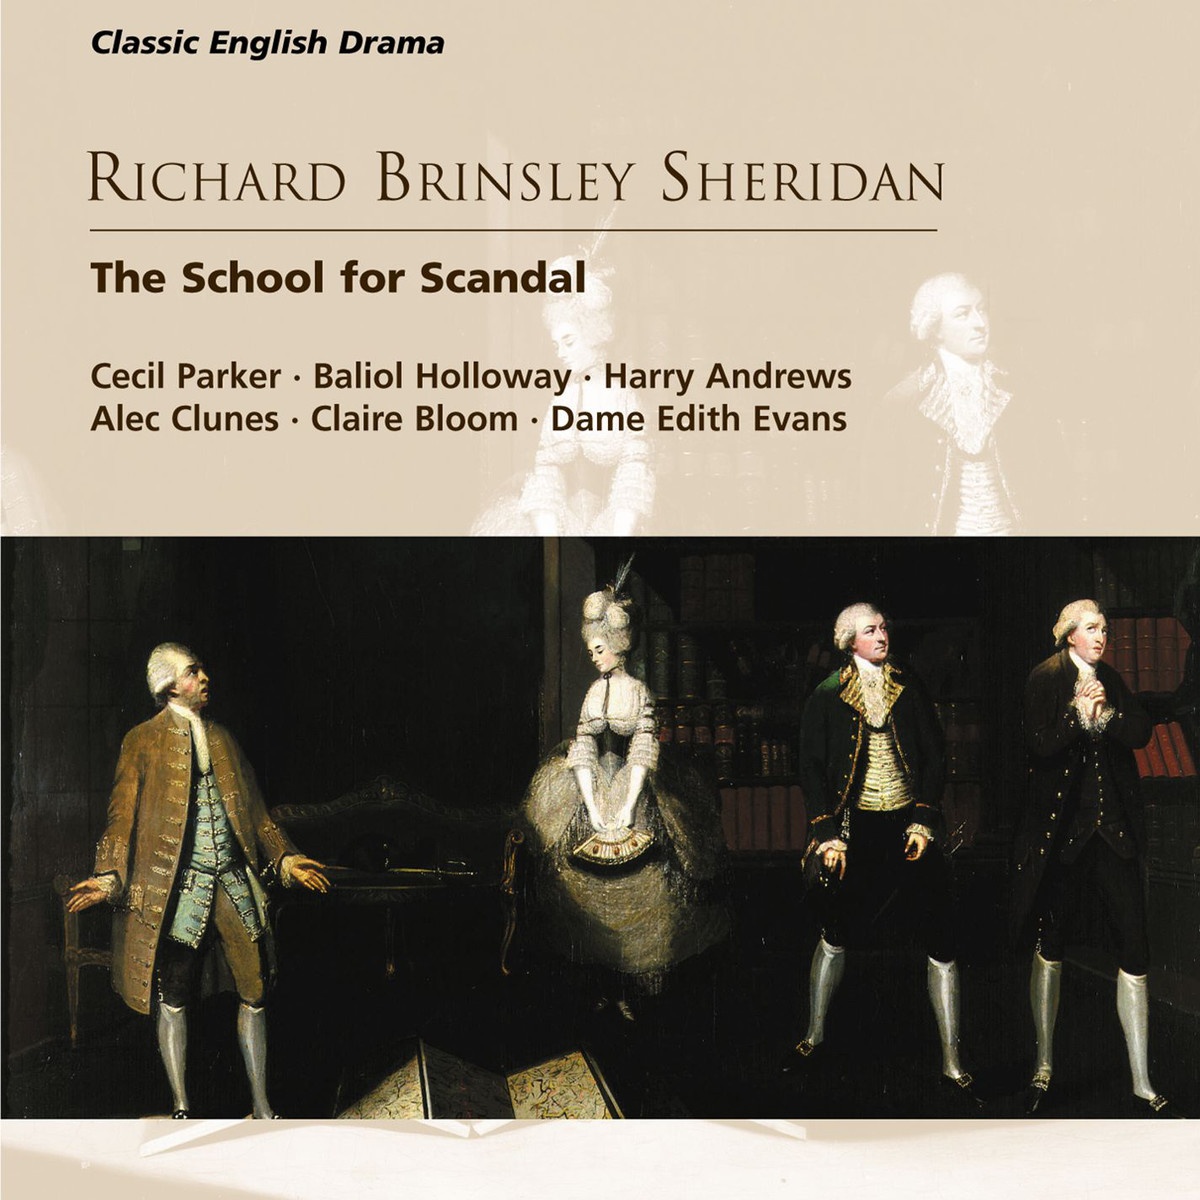 The School for Scandal - A comedy in five acts, Act IV, Scene 1 (Picture room at Charles's): Walk up, gentlemen, pray walk up (C